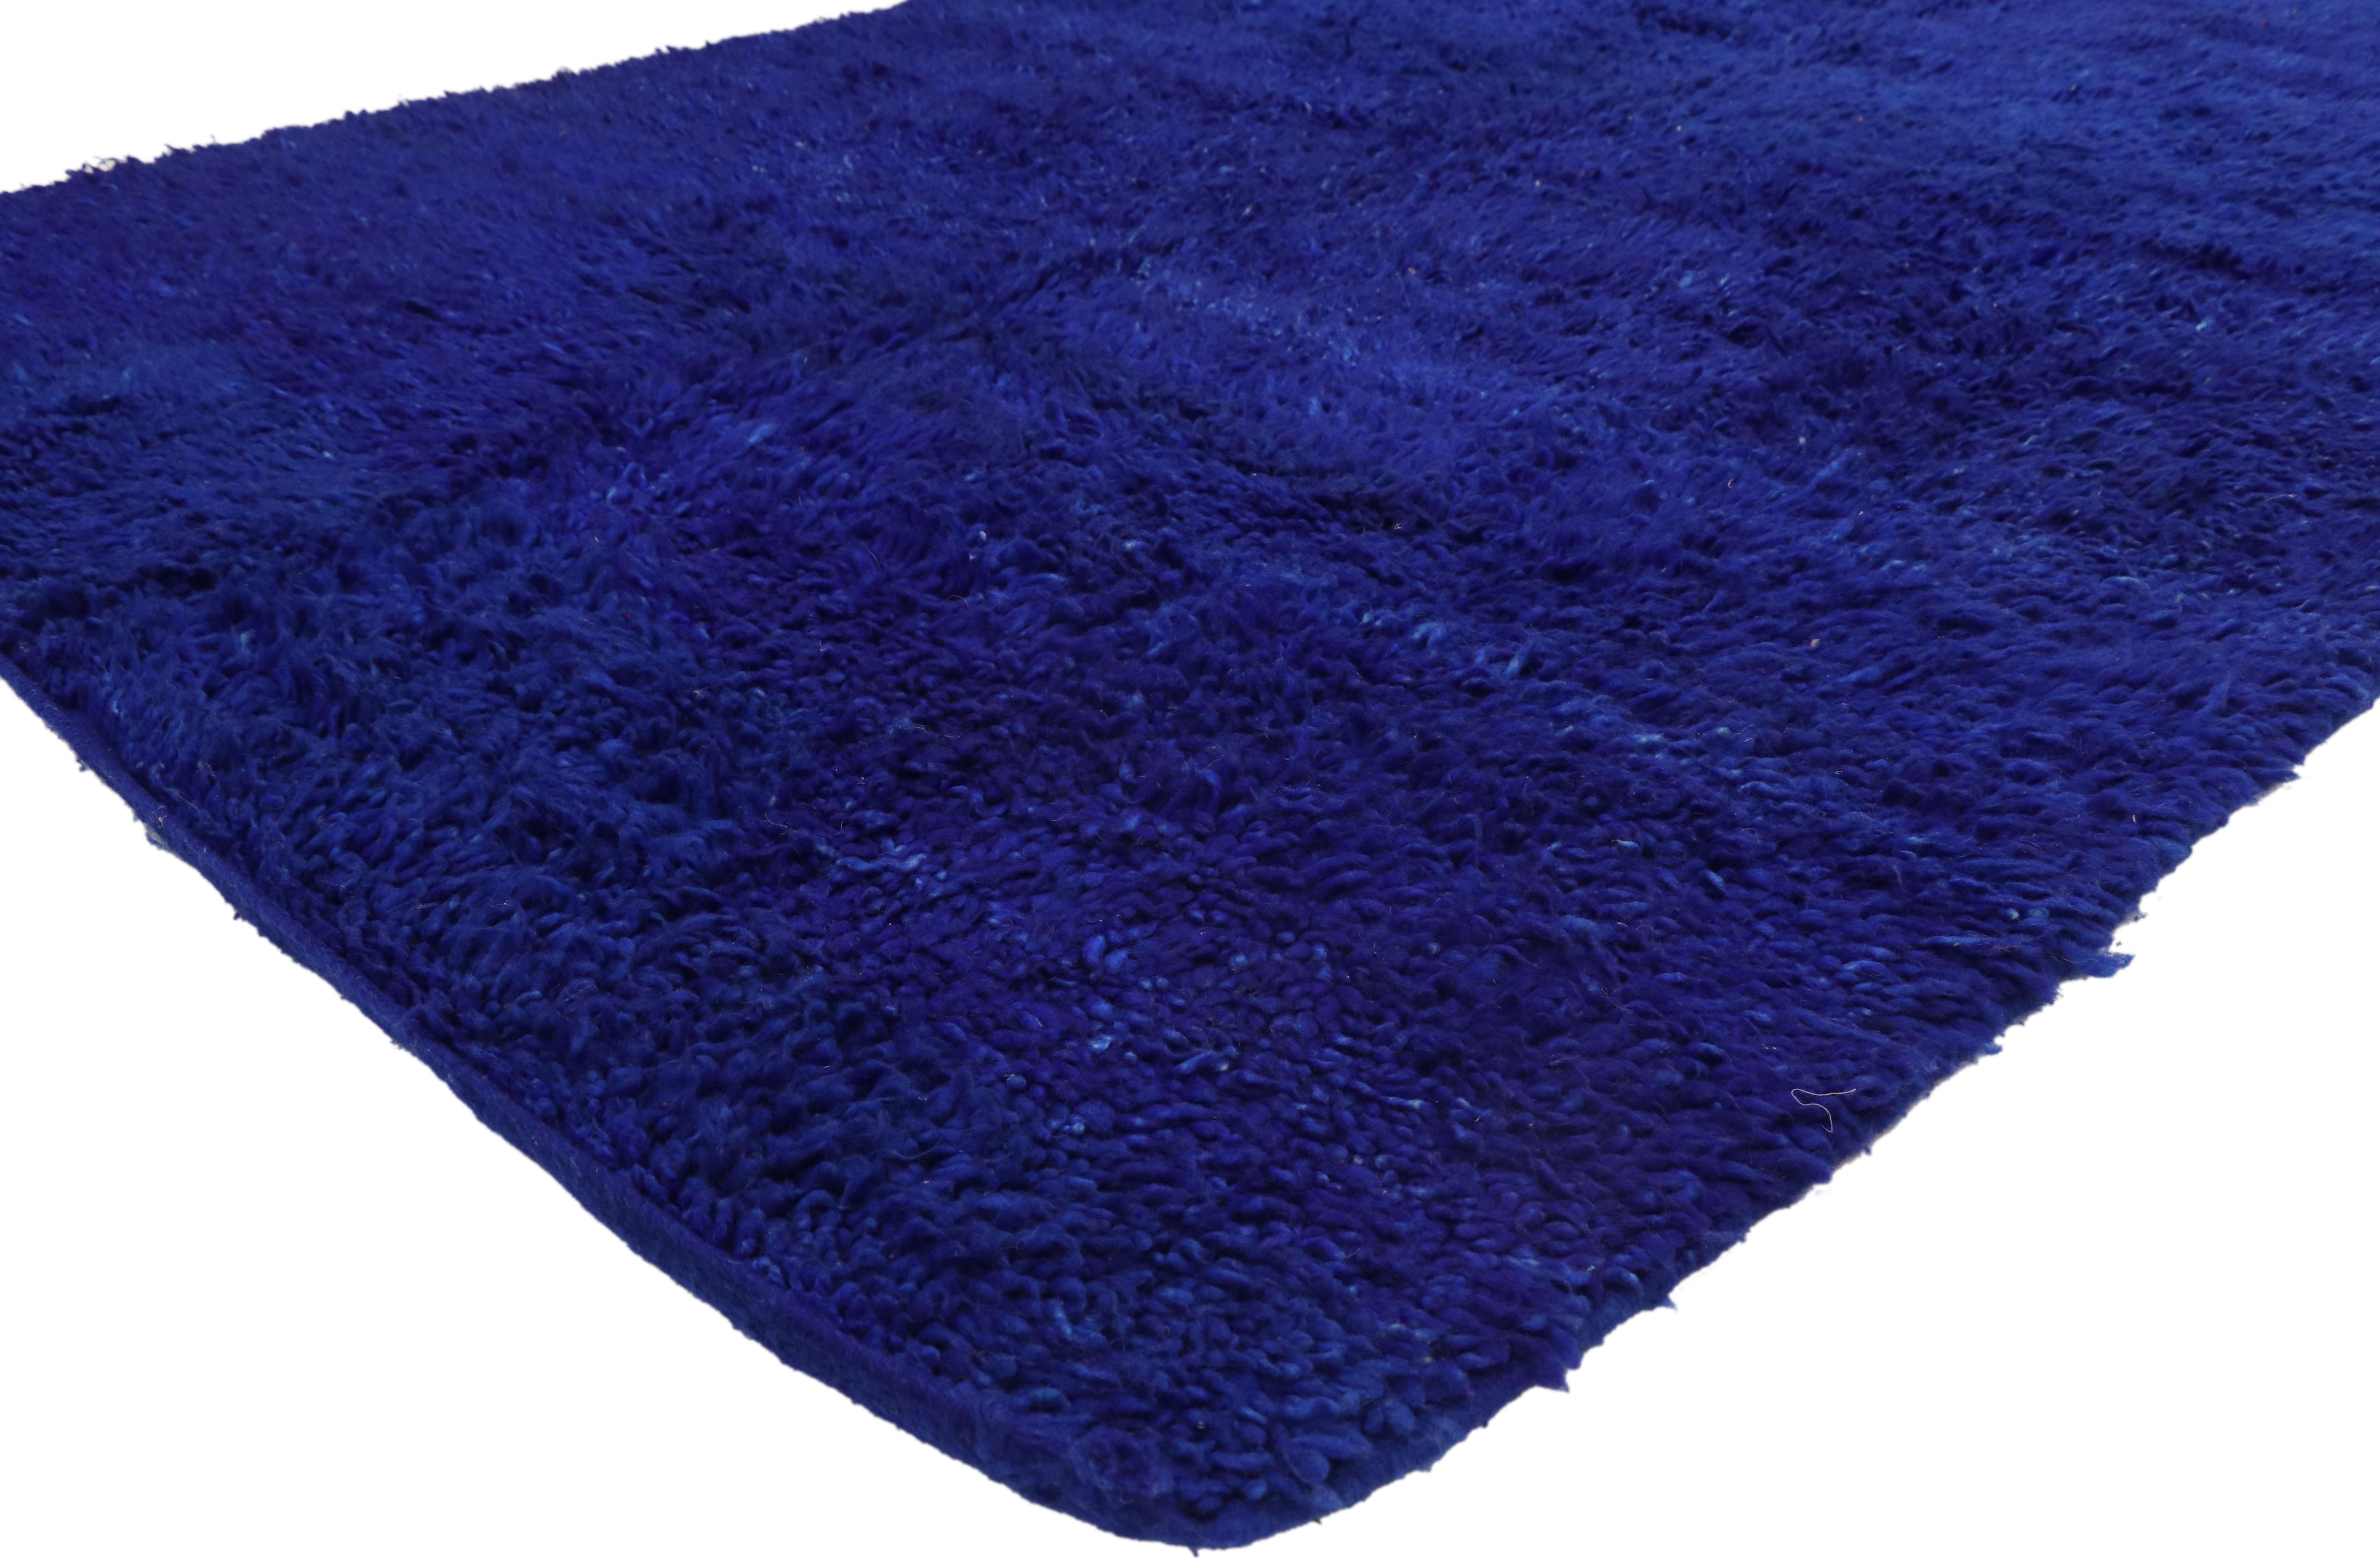 21011, vintage blue indigo Beni Mrirt Moroccan rug, Berber Blue Moroccan rug. This hand knotted wool vintage Beni Mrirt Moroccan rug emanates function and versatility with it's shaggy pile and modern vibes while staying true to the authentic spirit